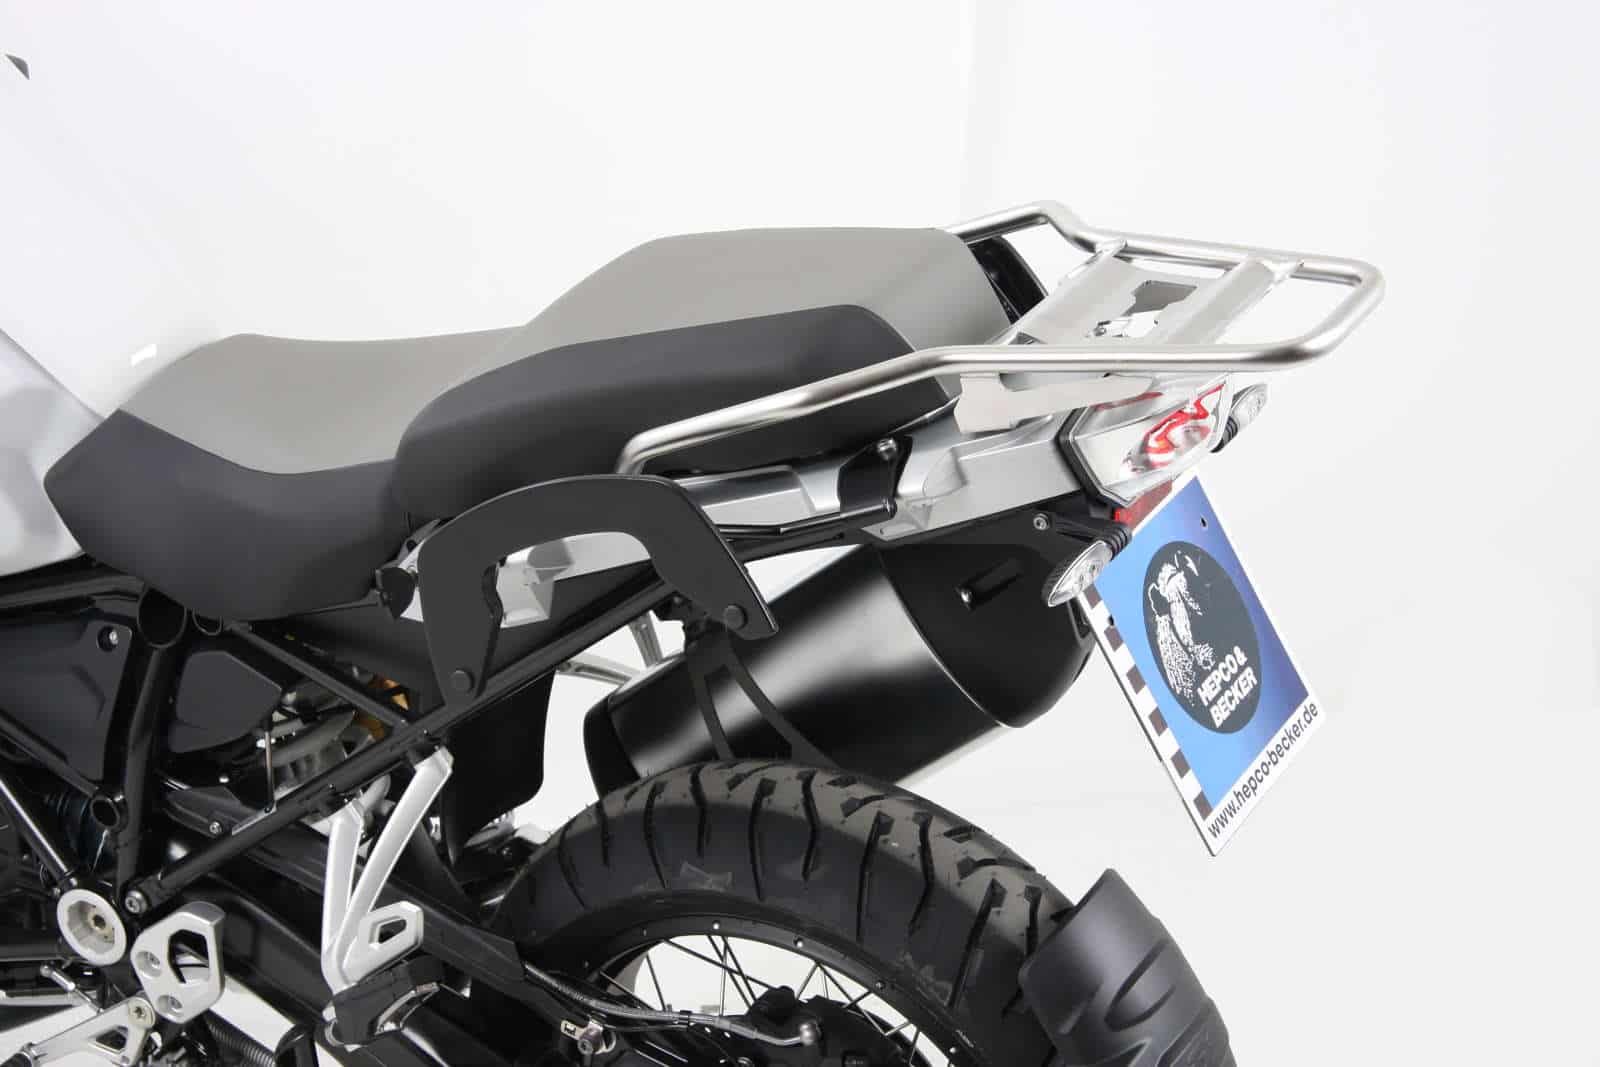 C-Bow sidecarrier for BMW R 1200 GS Adventure (2014-2018)